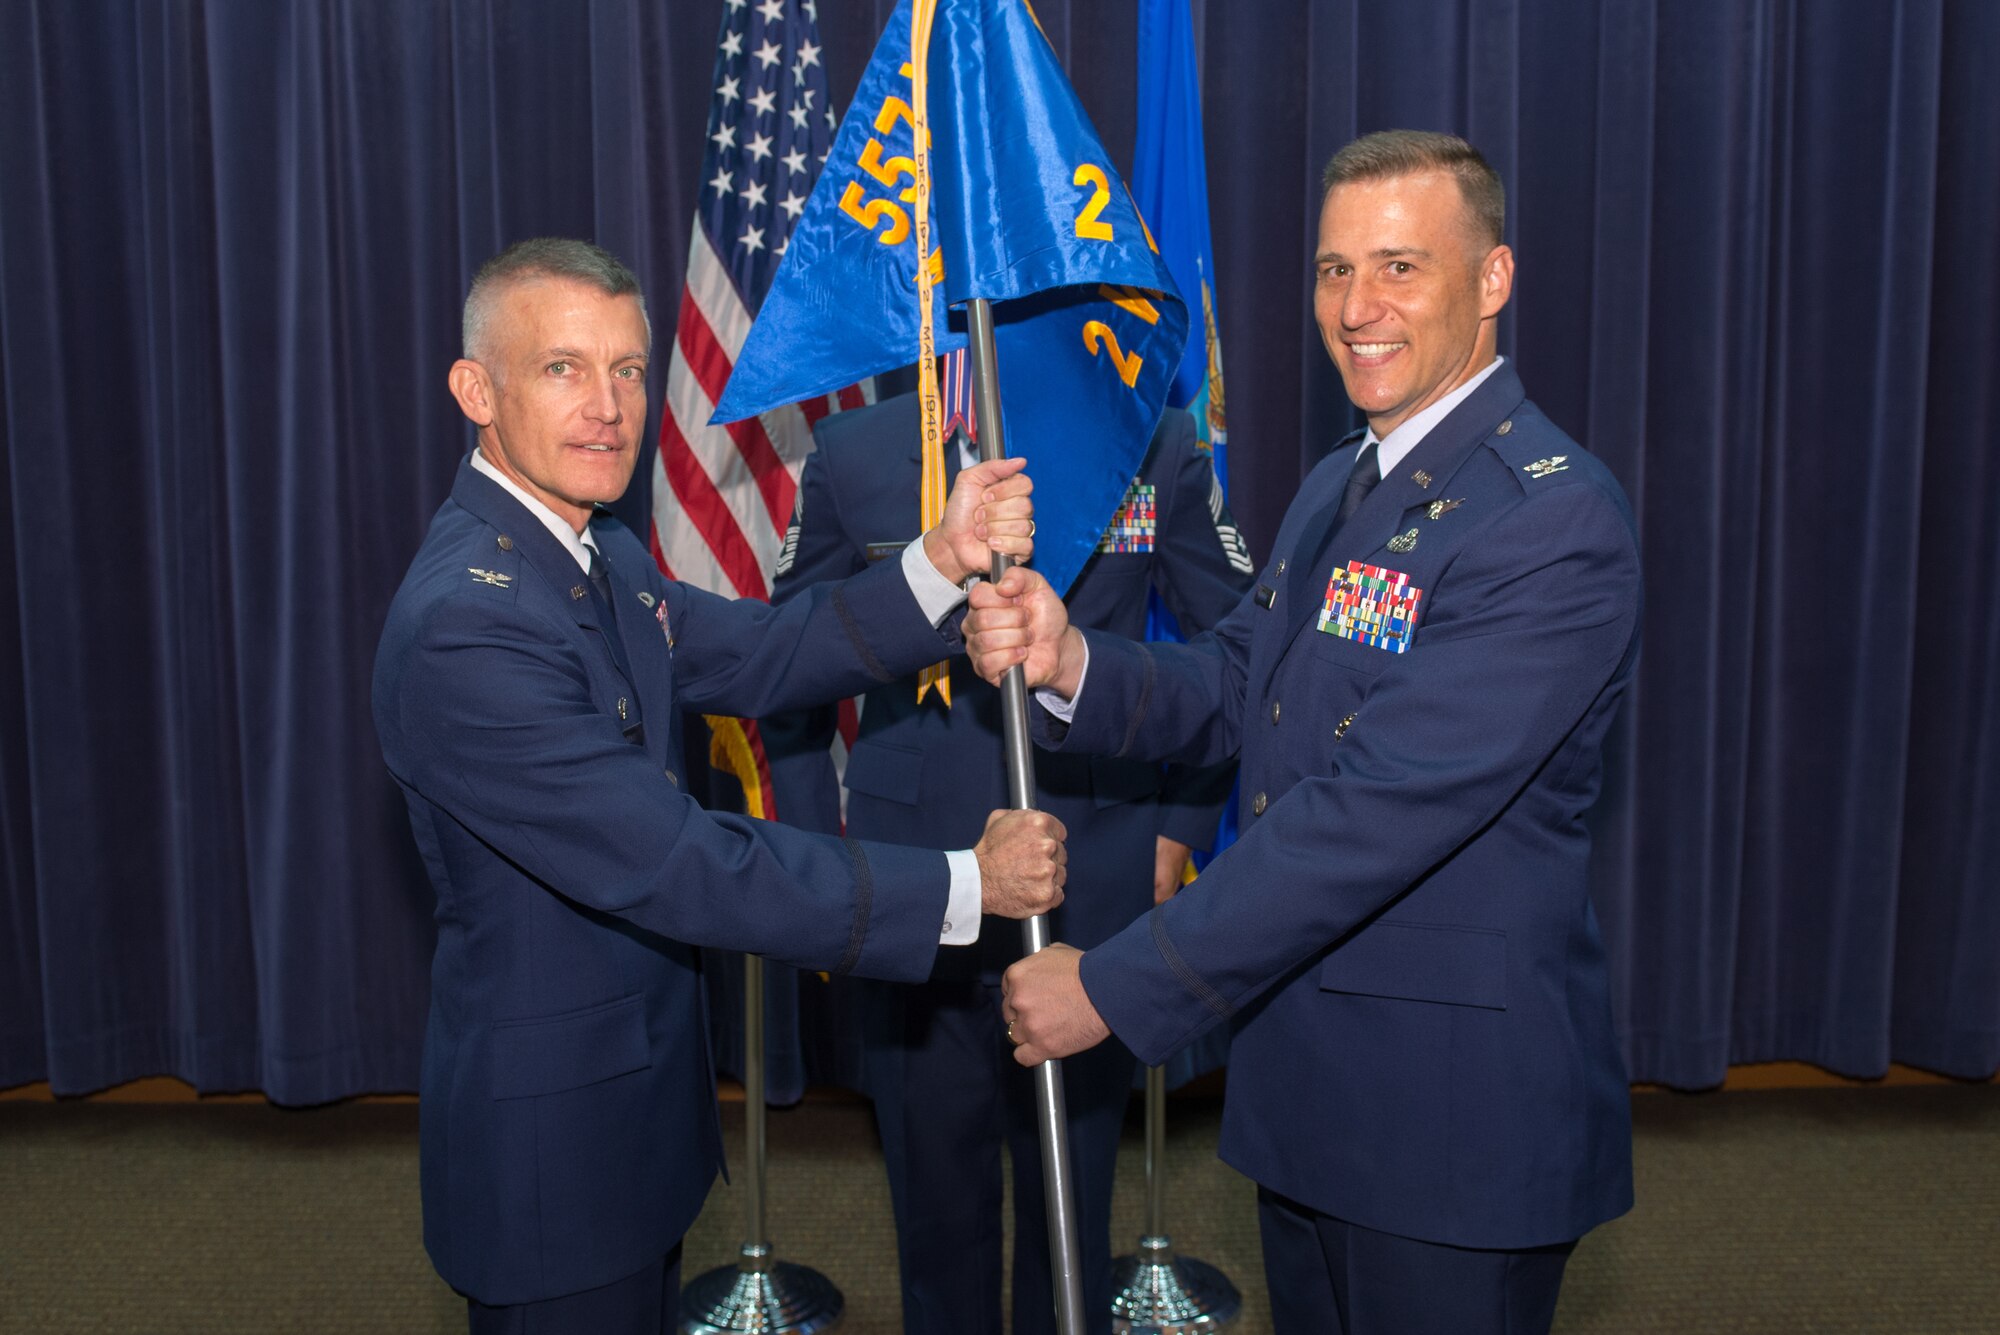 U.S. Air Force Col. Patrick Williams, 2nd Weather Group (WXG) commander, assumes command of the 2nd WXG from U.S. Air Force Col. Brian Pukall, 557th Weather Wing commander, July 11, 2018, at Offutt Air Force Base, Nebraska. 2nd WXG provides global, terrestrial, space and climatological environmental intelligence to the joint force, defense agencies, Department of Defense senior leaders, select members of the intelligence community, interagency partners and allied nations. (U.S. Air Force photo by Paul Shirk)